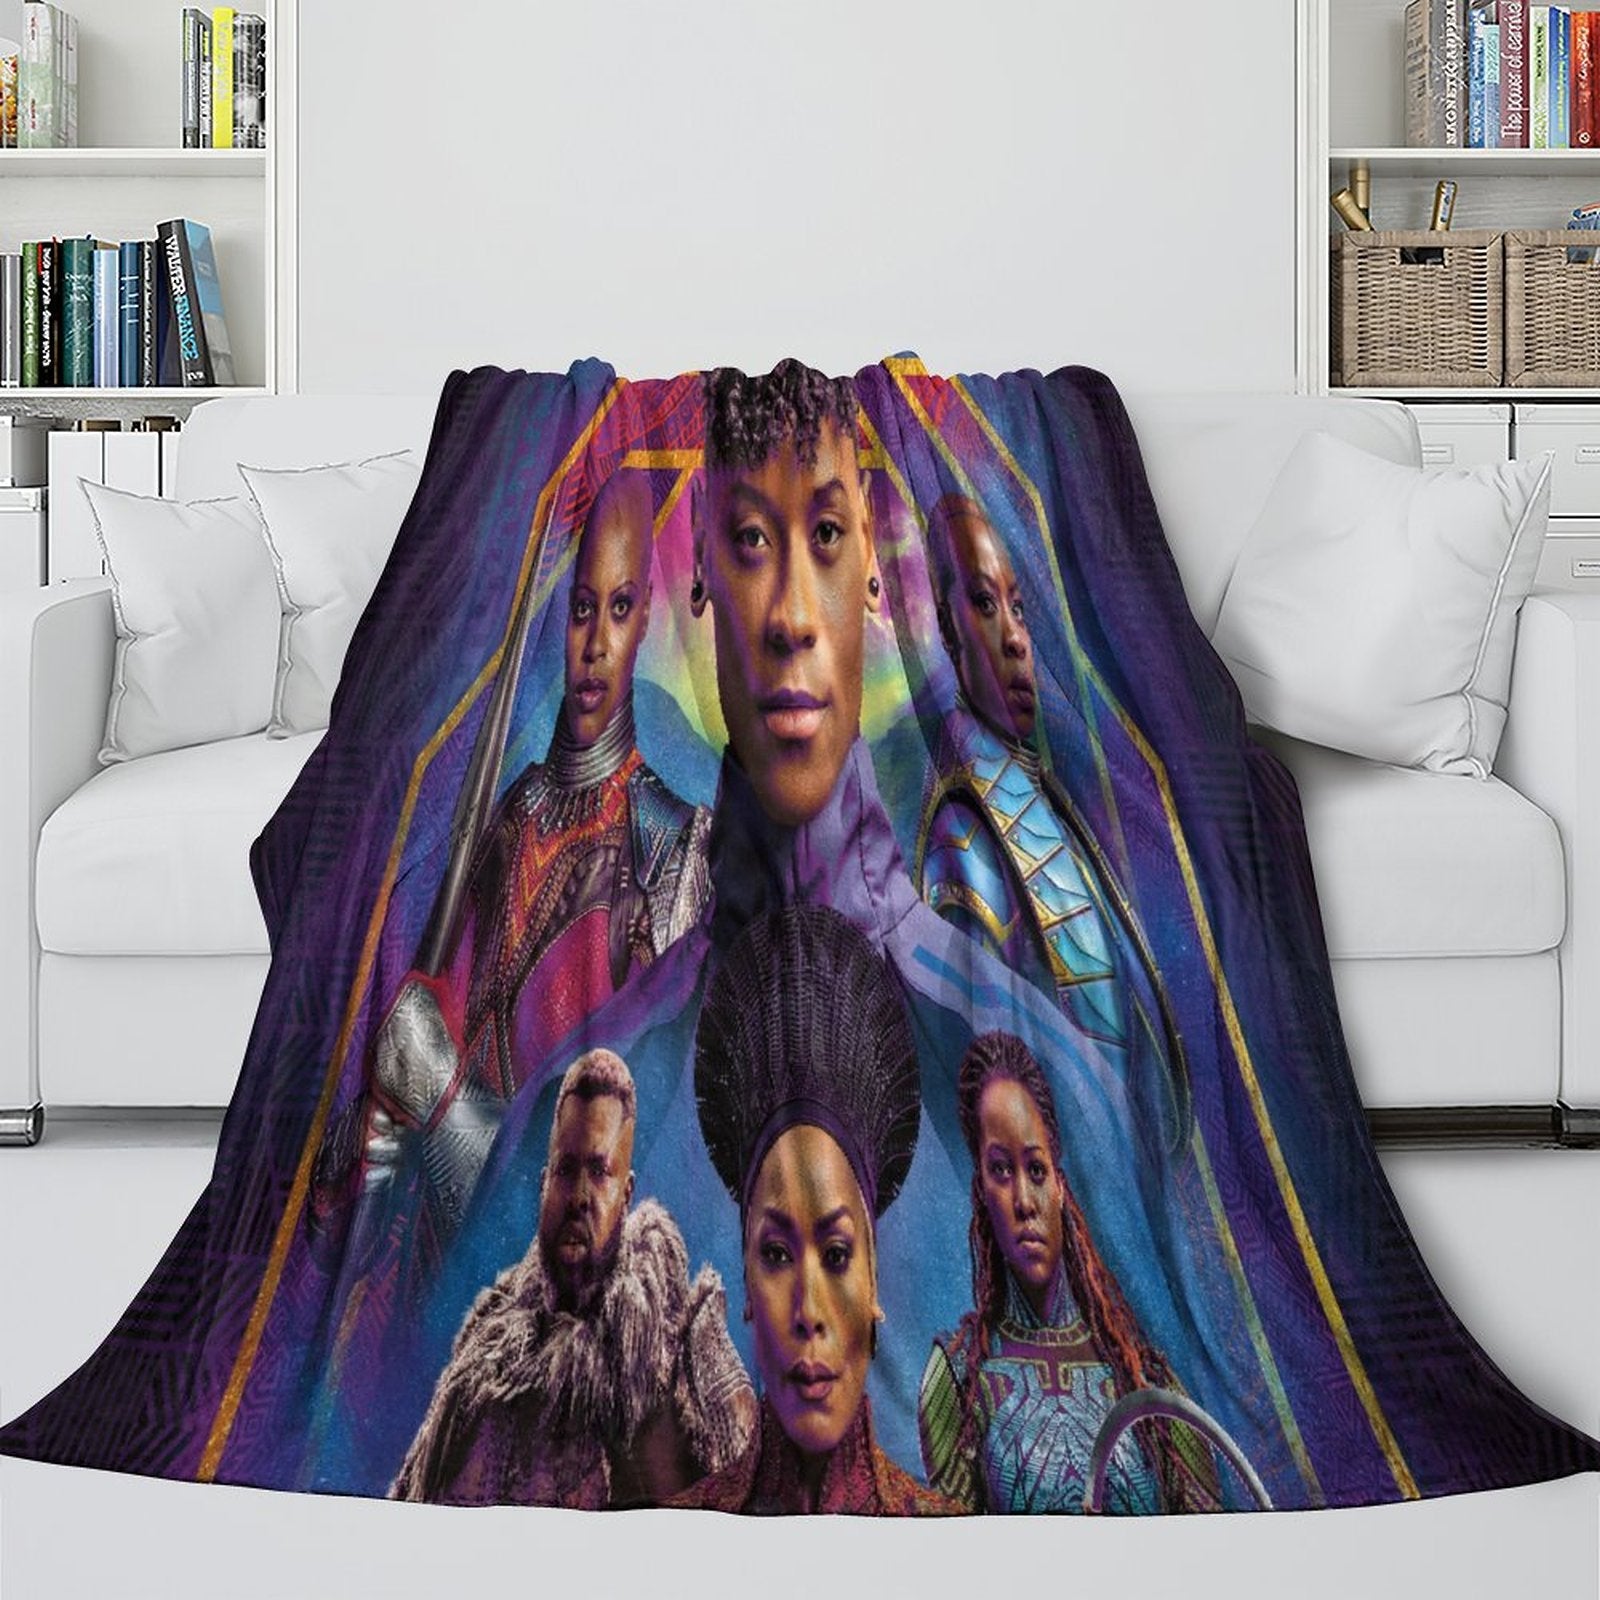 2024 NEW Black Panther Wakanda Forever Blanket Flannel Throw